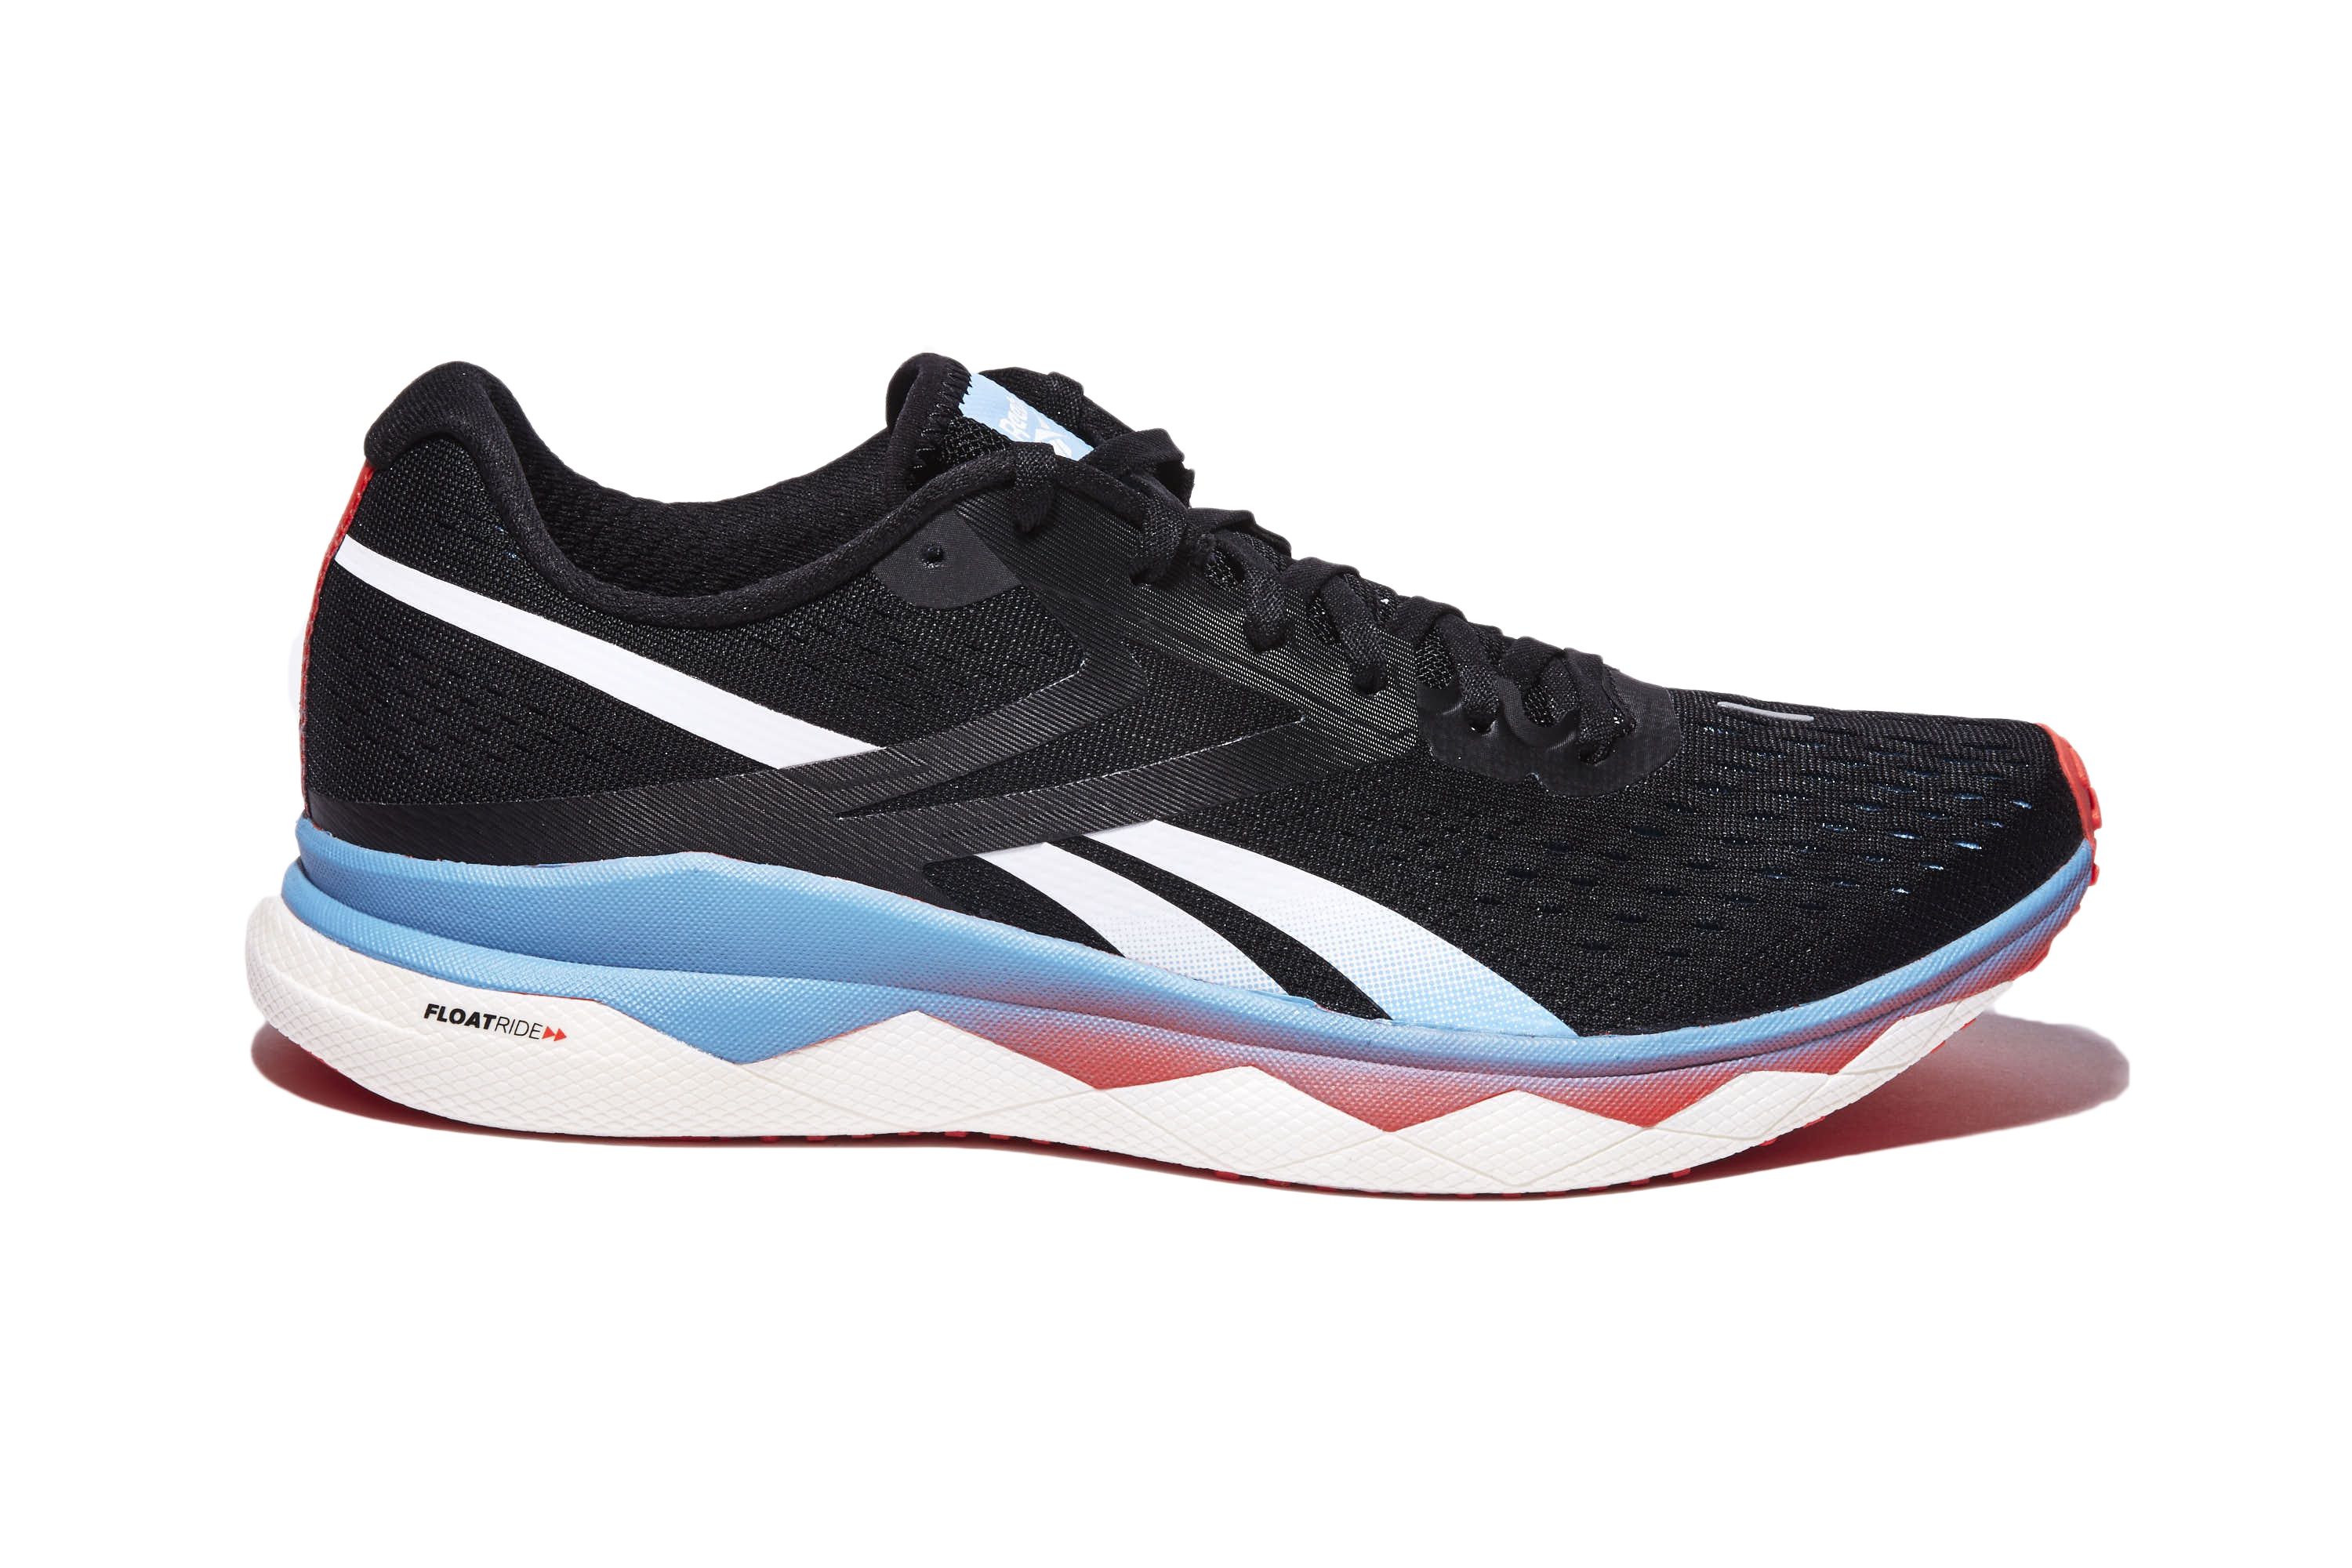 reebok vision speed shoes